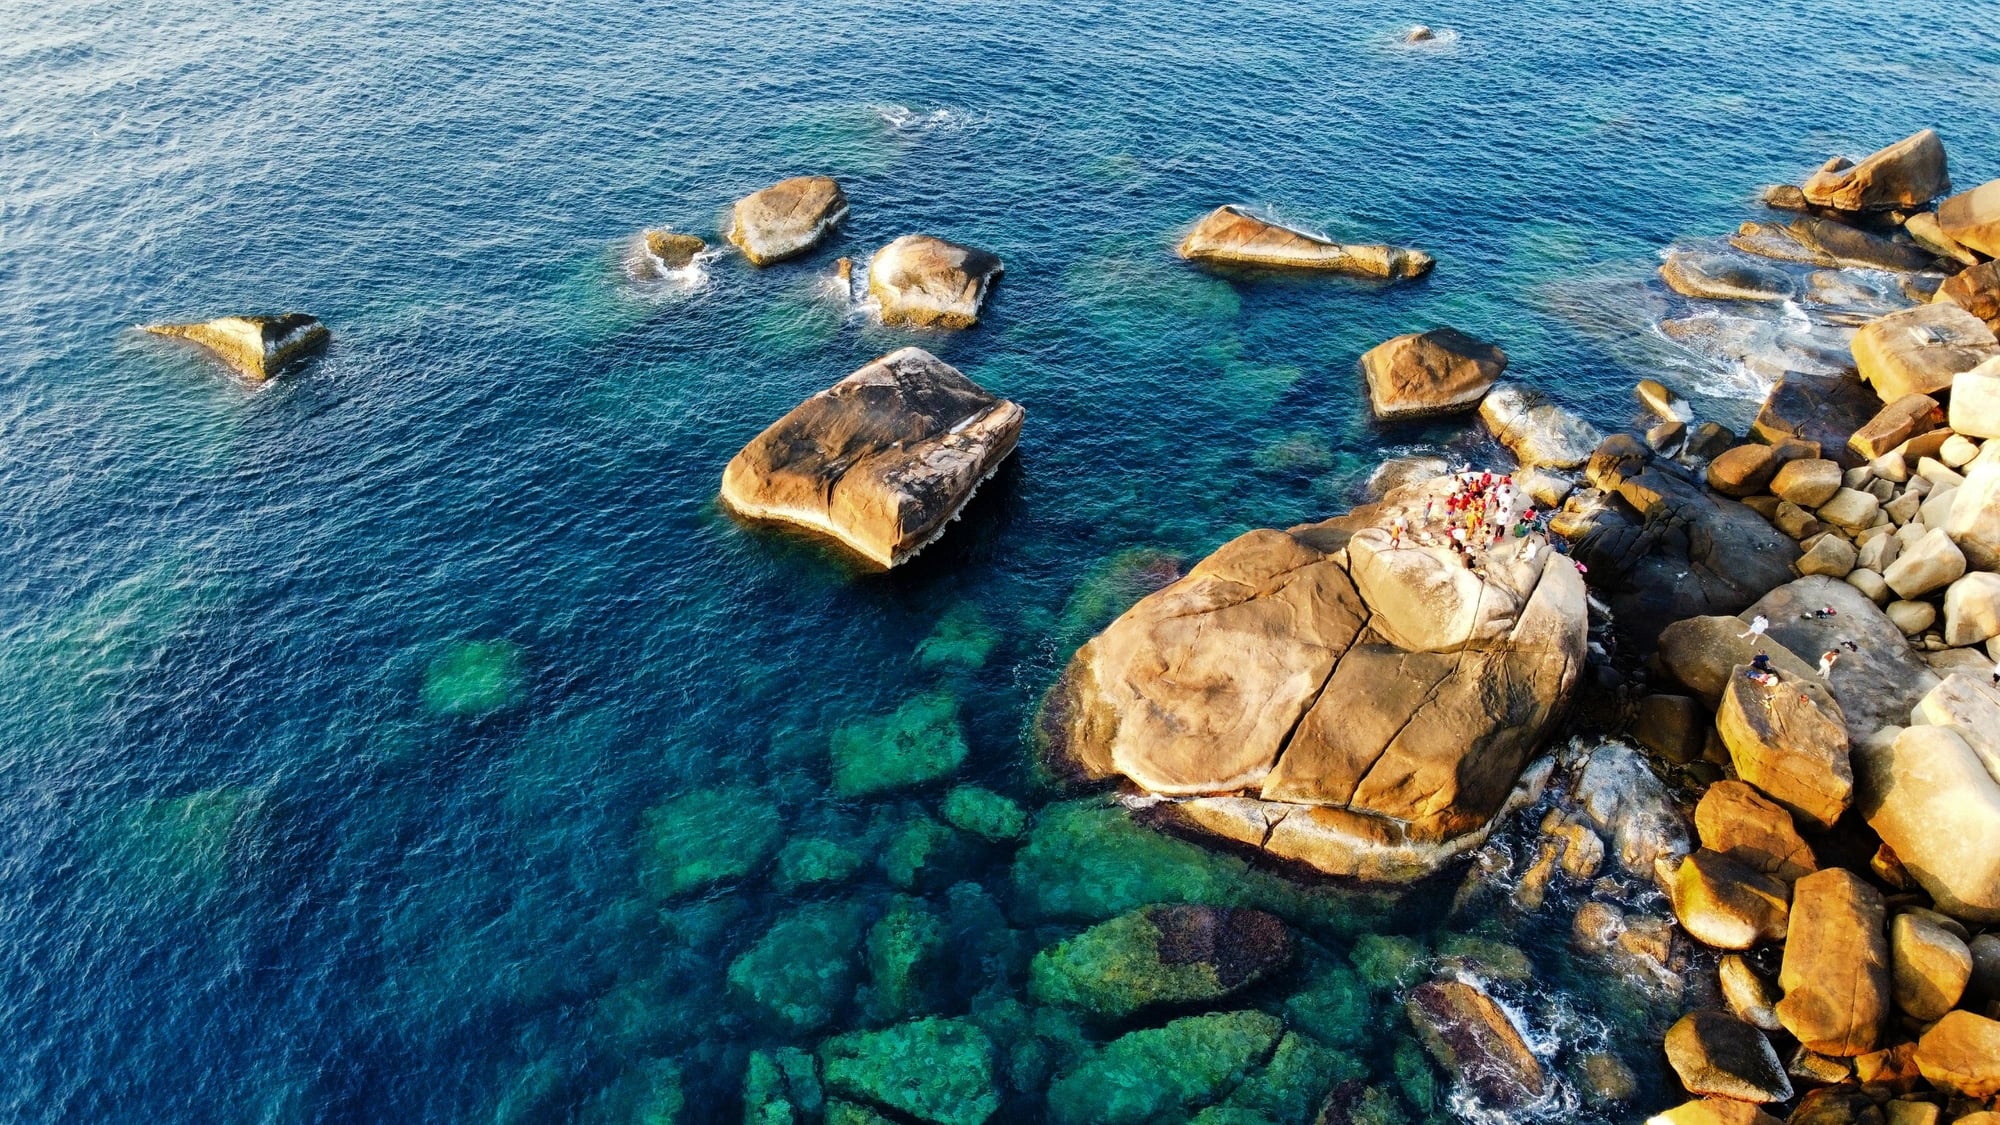 The jade-green water surface at the easternmost point of Vietnam mainland. Photo: Tran Hoai